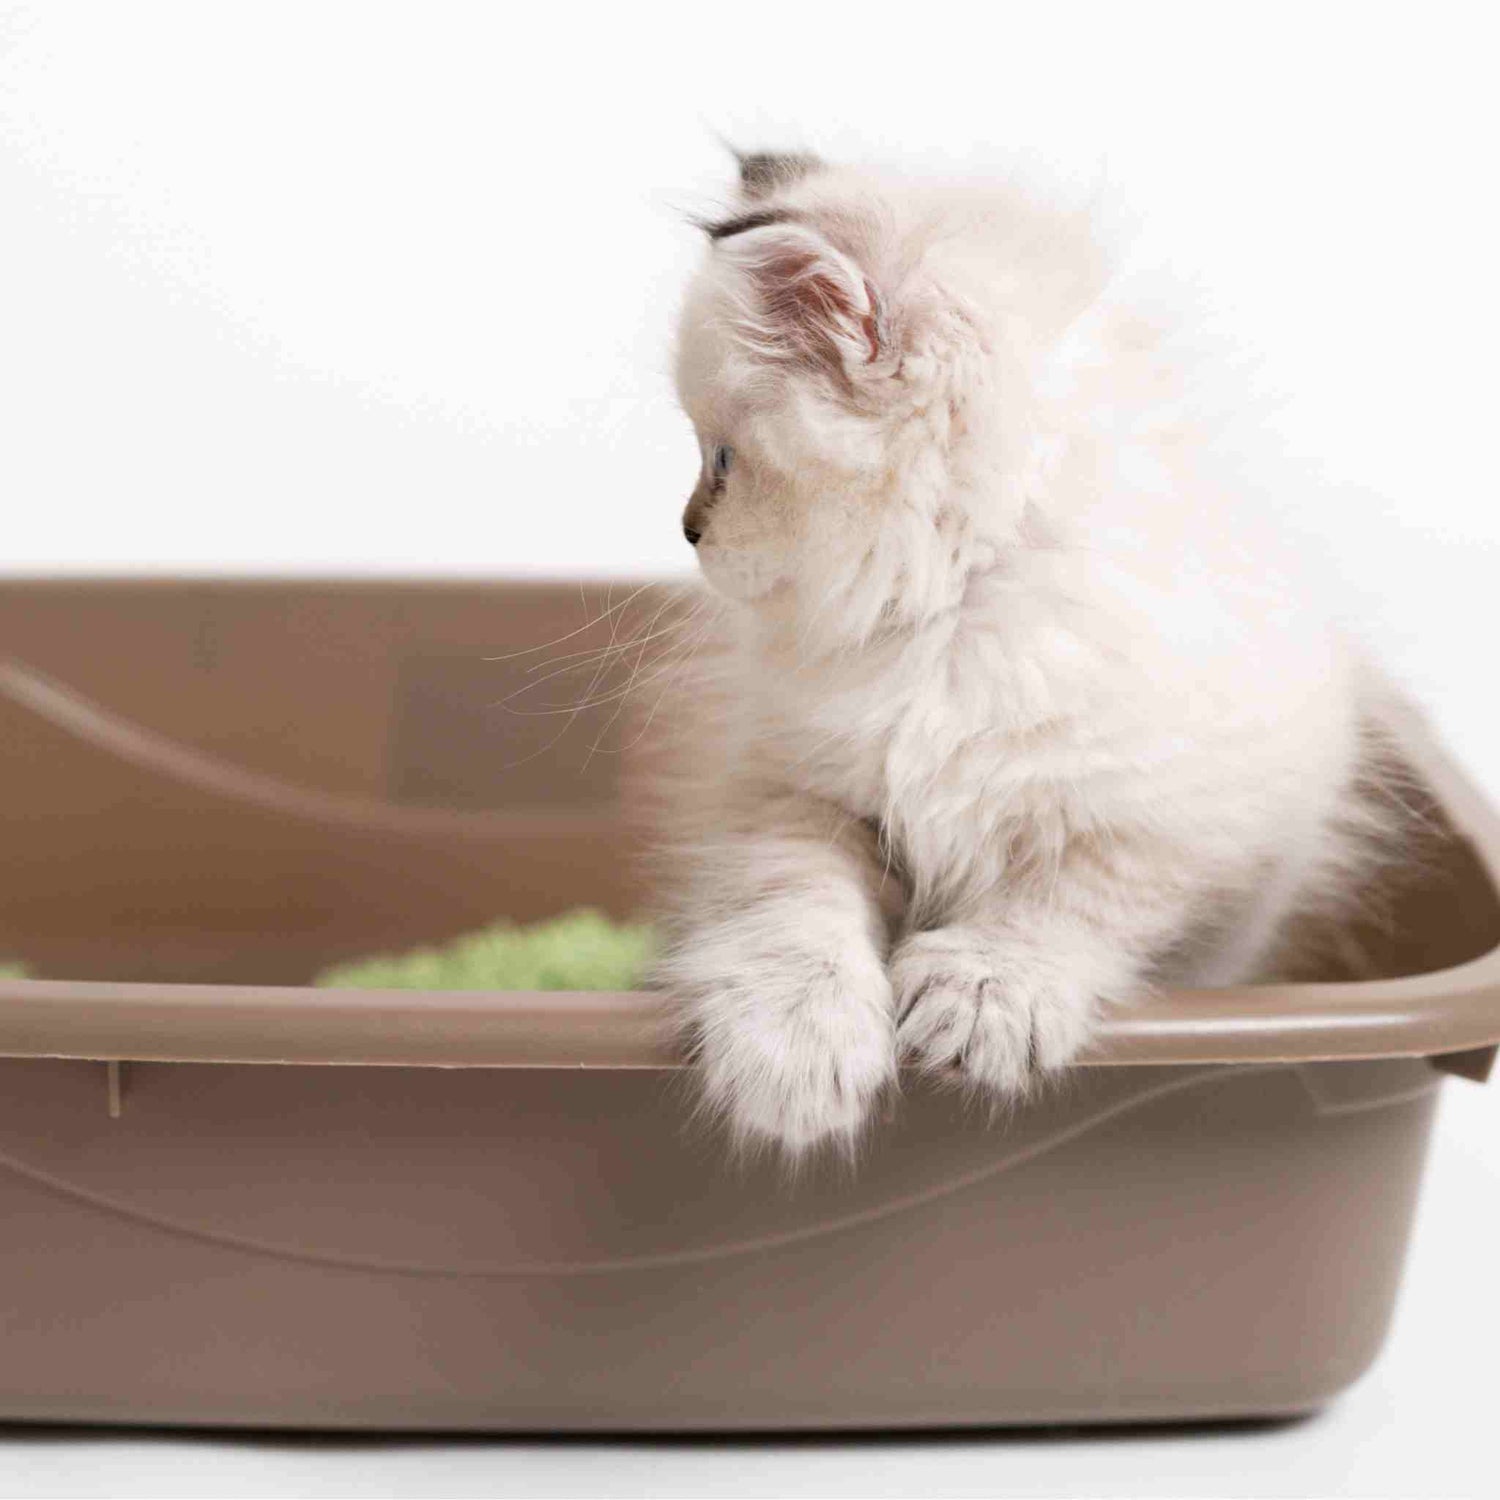 Kitten learning to use litter box for the first time, with SoyKitty’s safe, natural, eco-friendly litter, green tea scented.